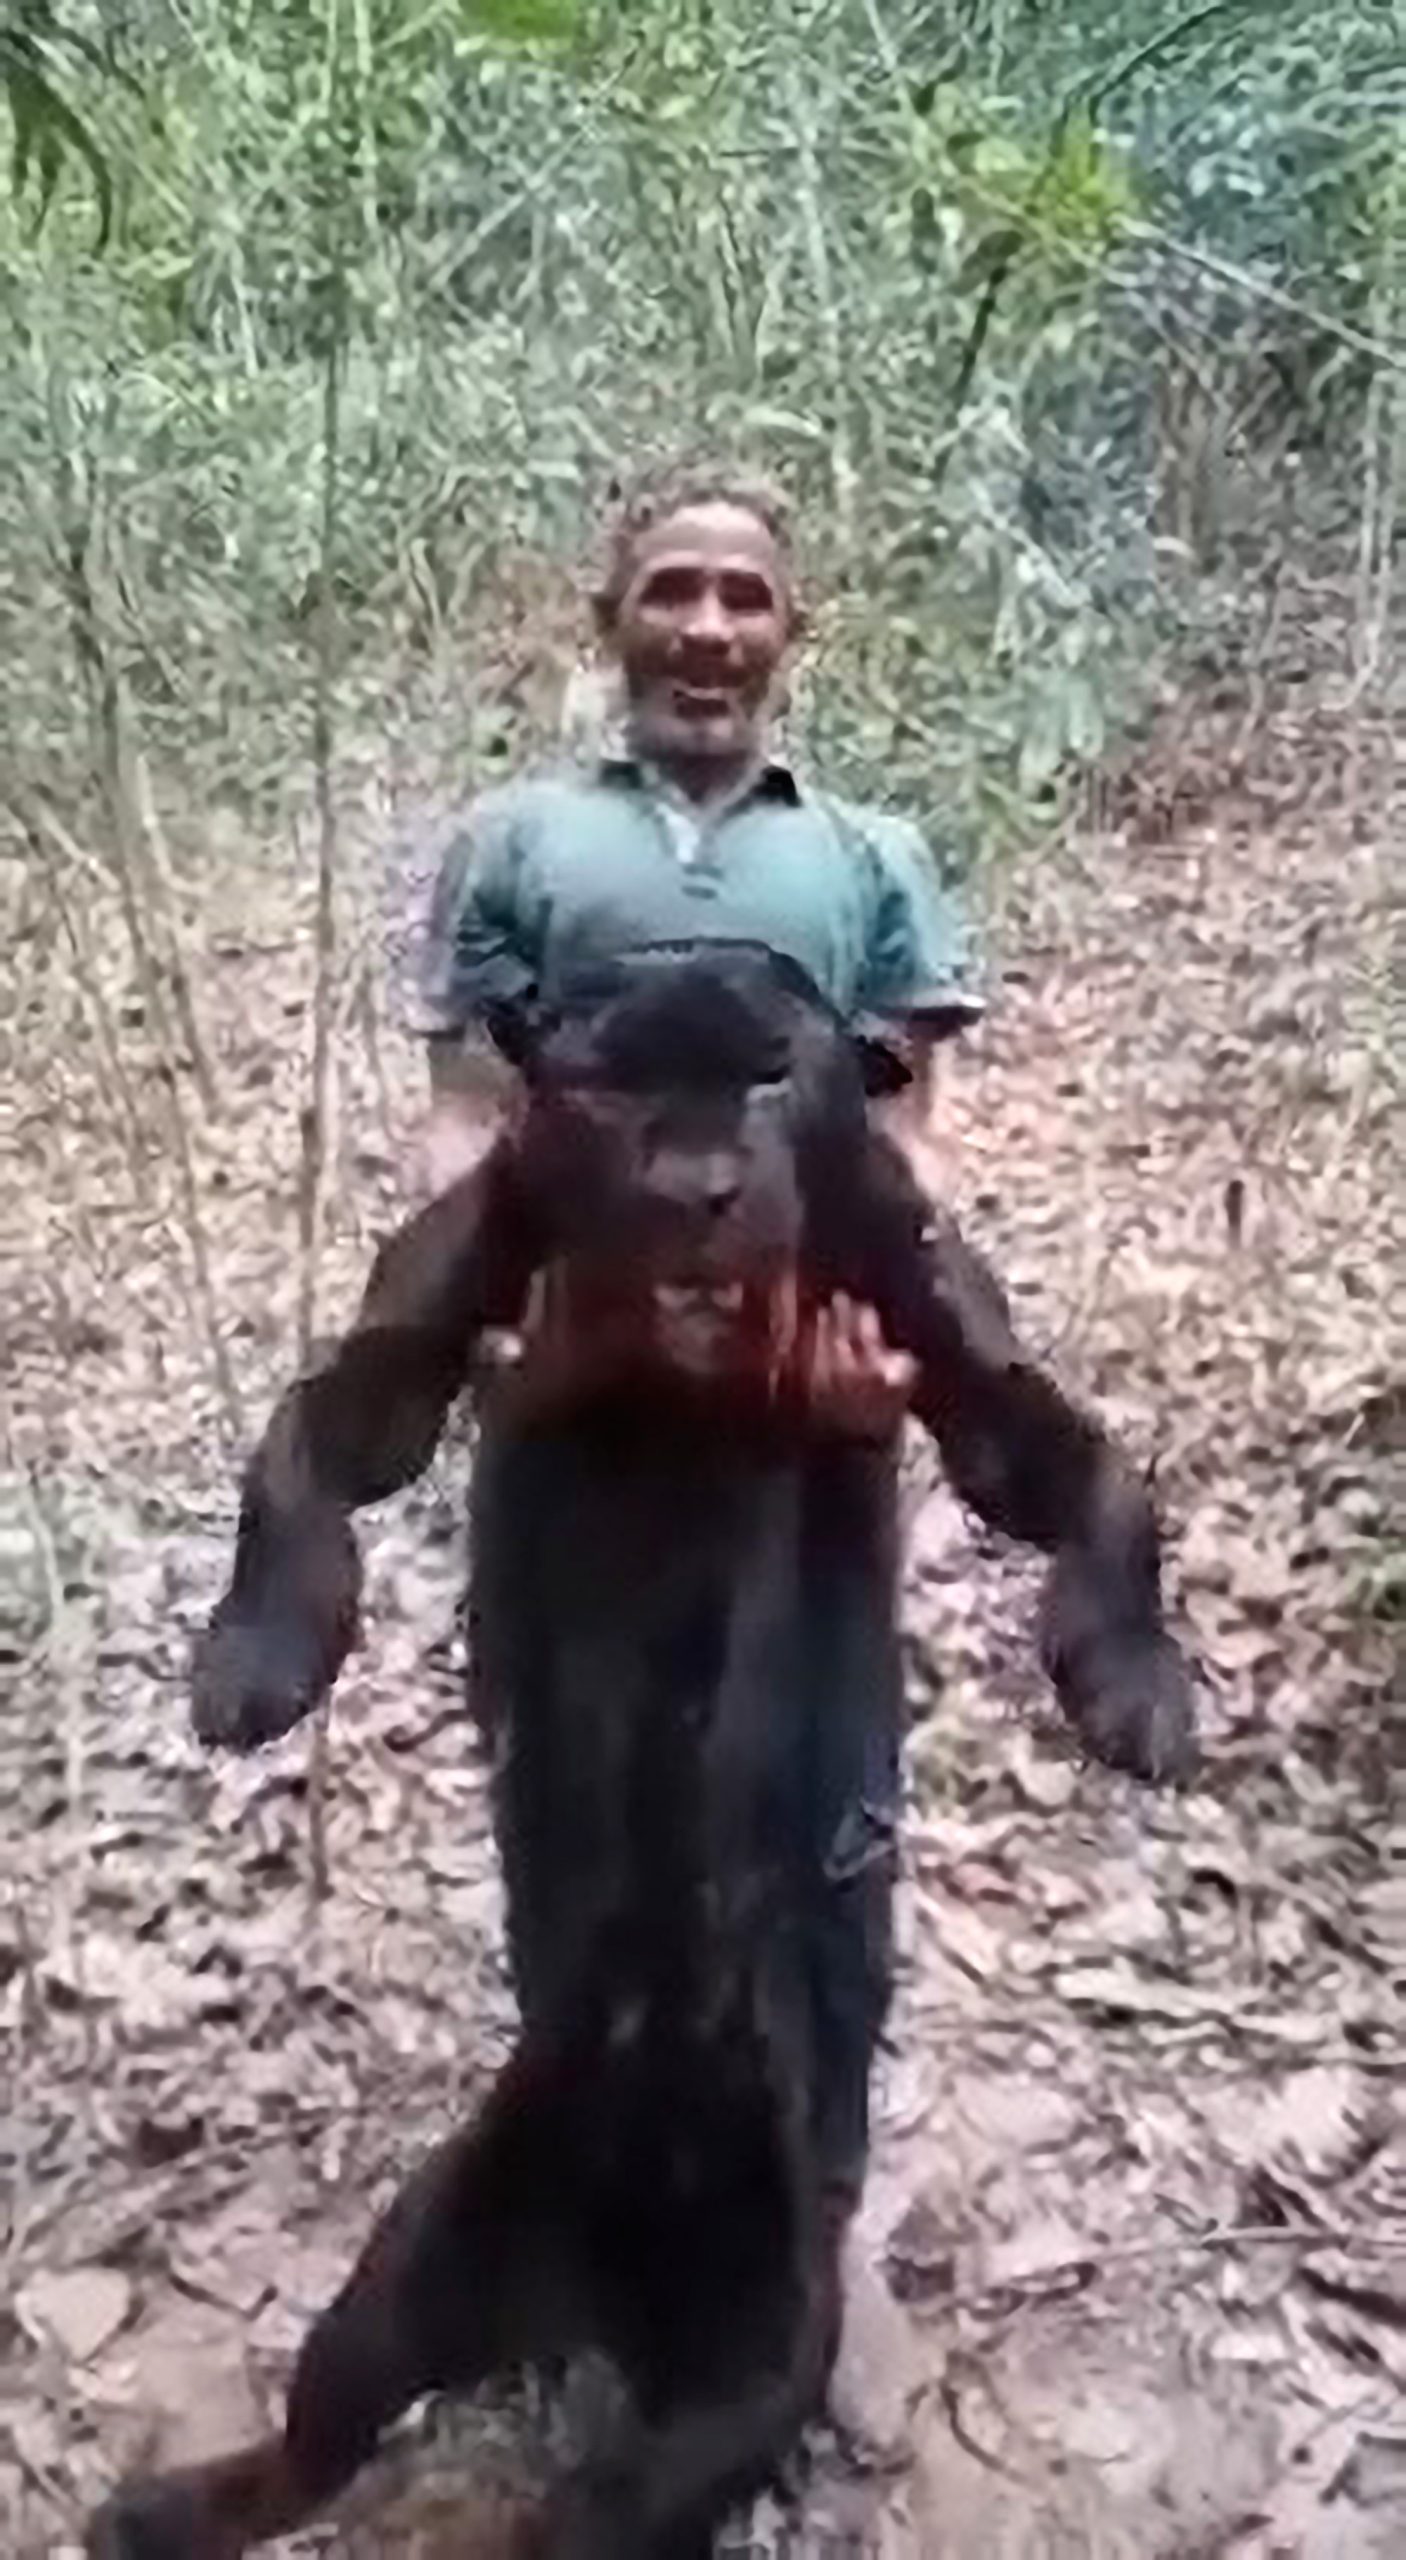 Read more about the article Outrage After Images Go Viral Showing Poacher In Brazil Posing With Dead Panther As Trophy